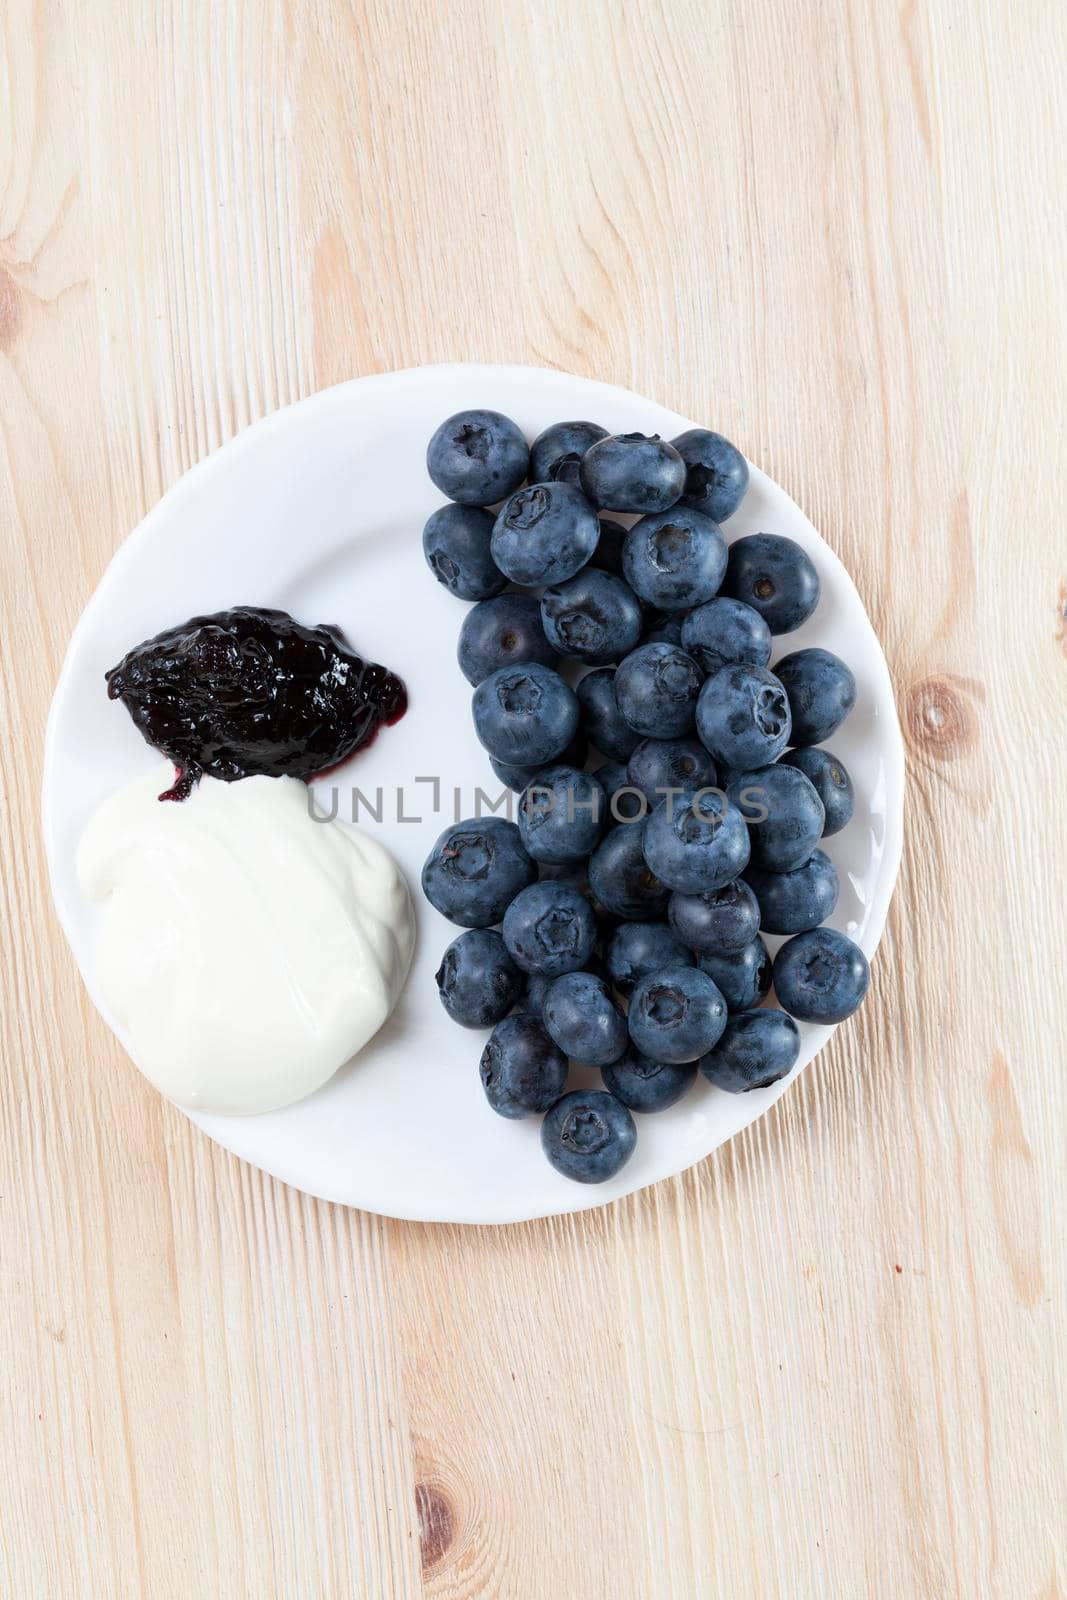 made at home dessert of blueberries, milk sauce on a wooden background